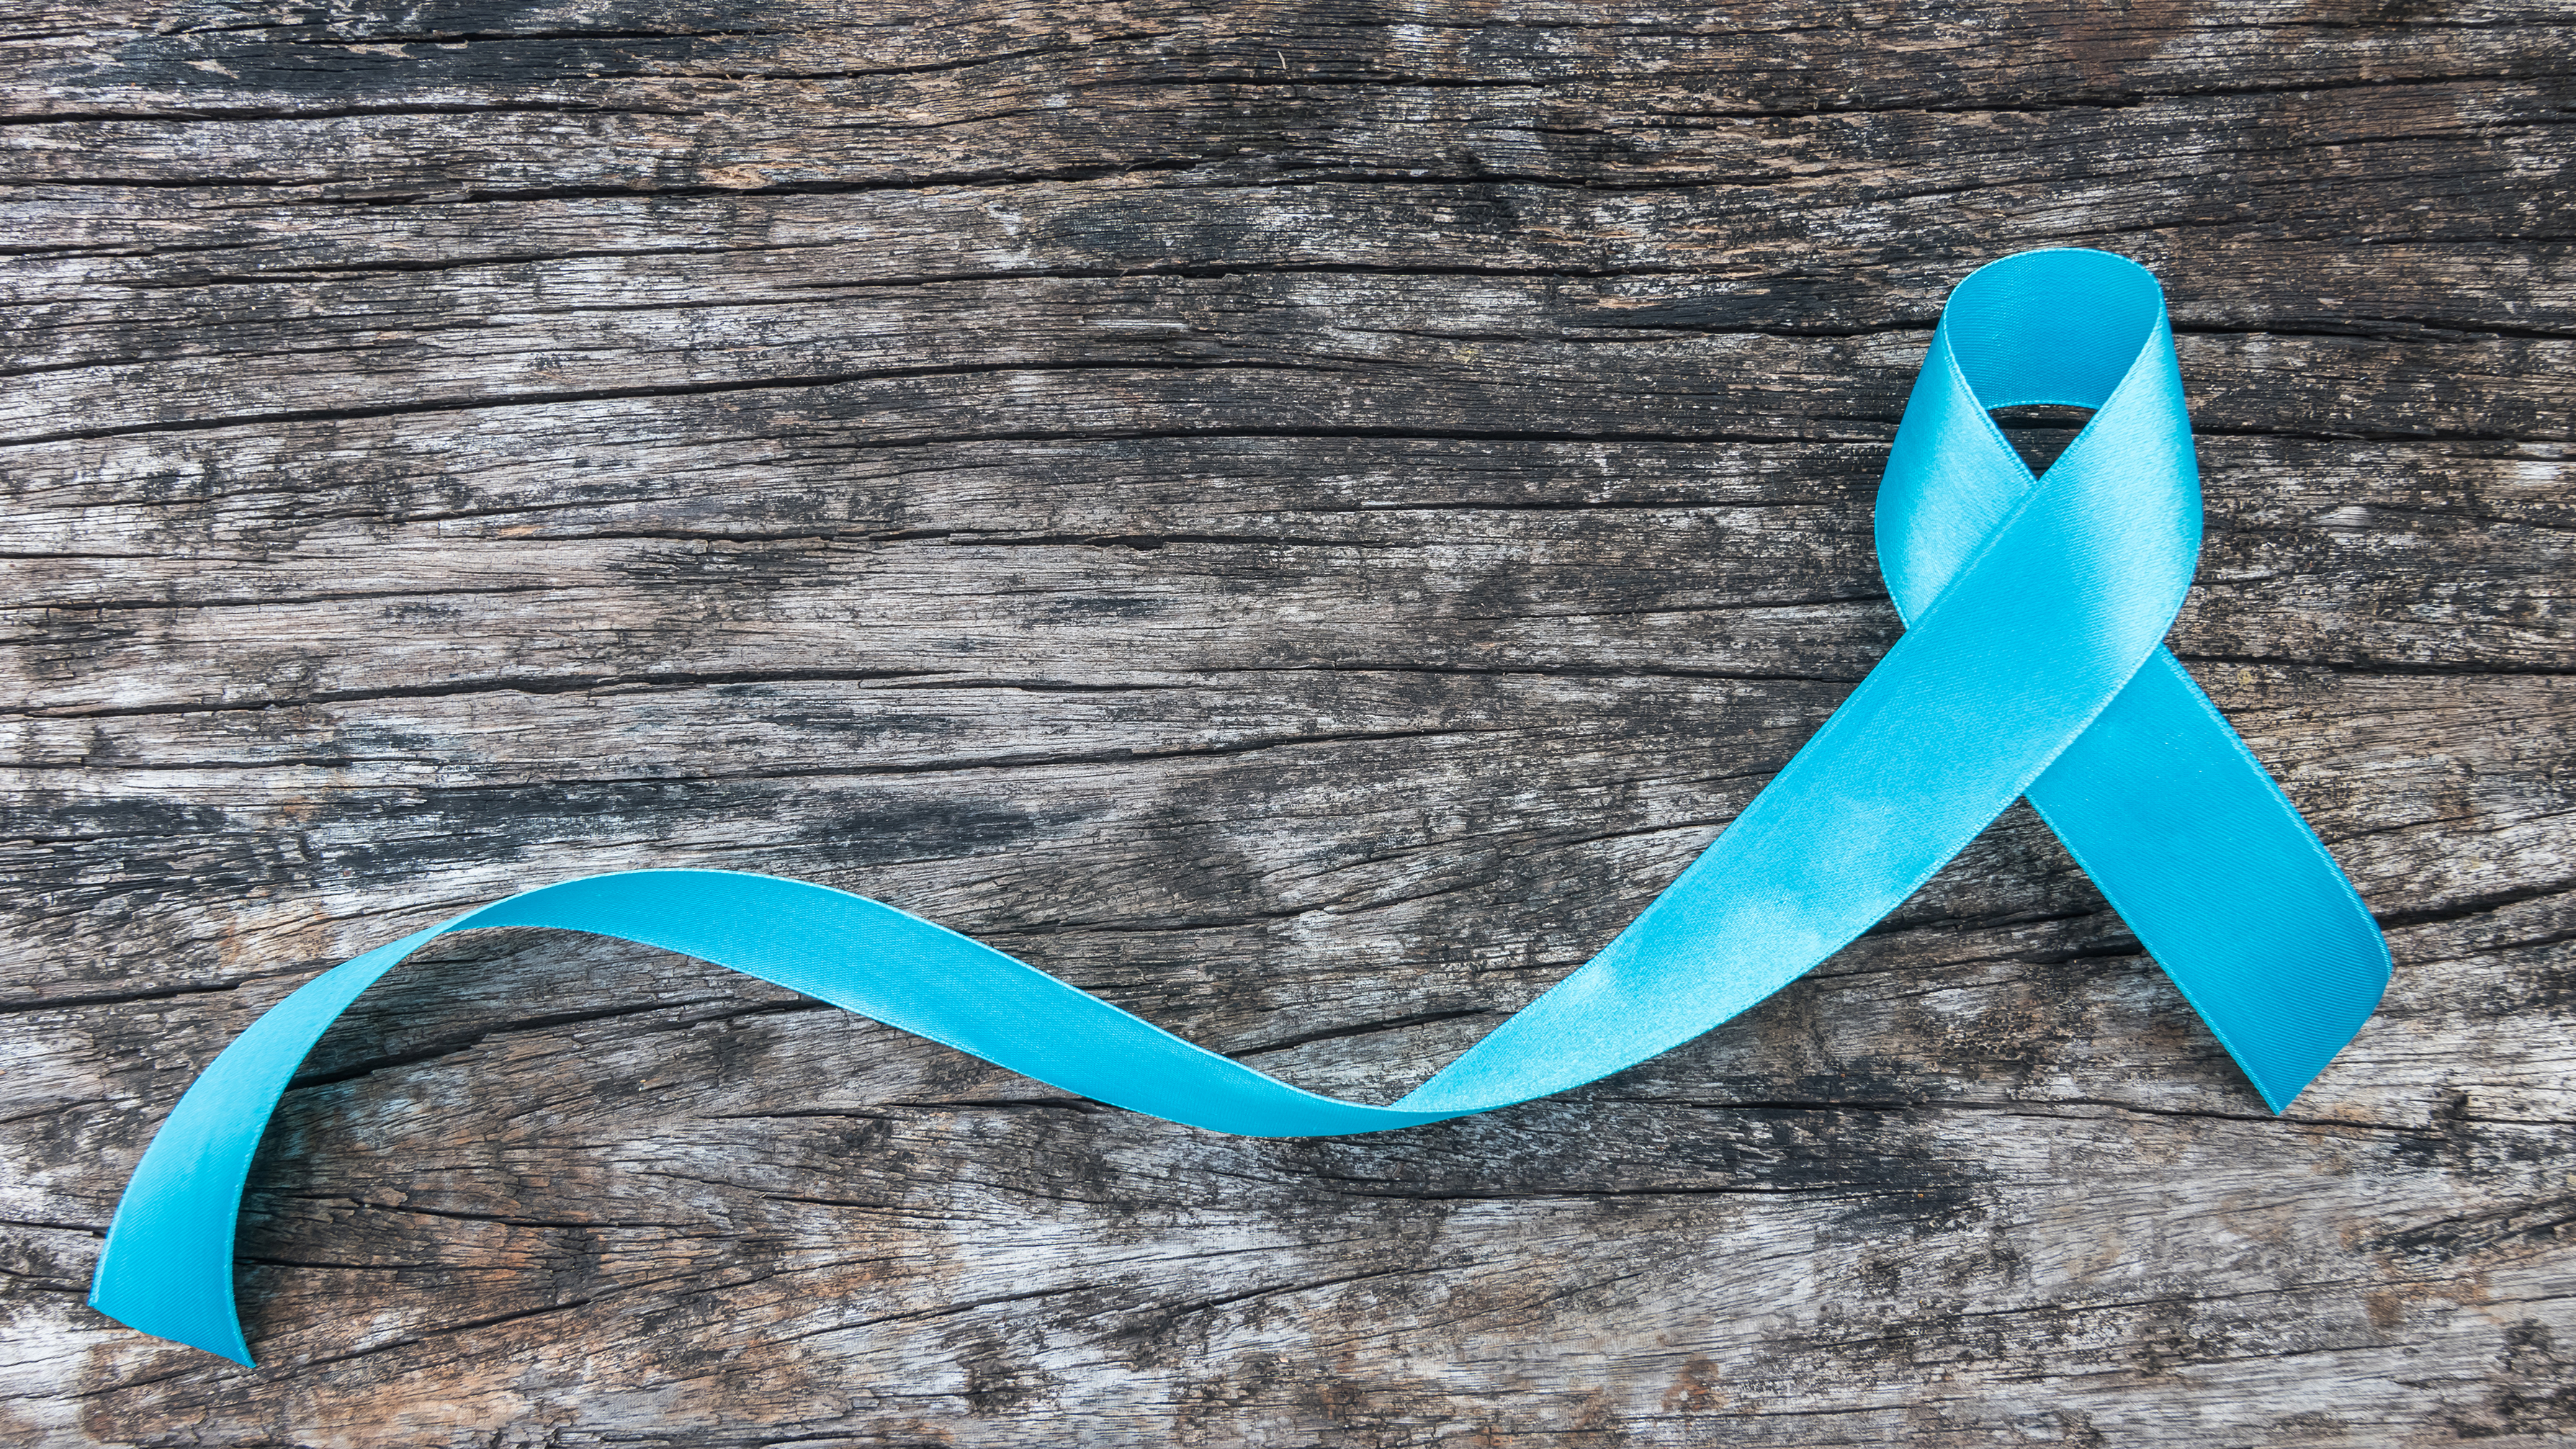 Blue ribbon symbolic of prostate cancer awareness campaign and men's health in November month